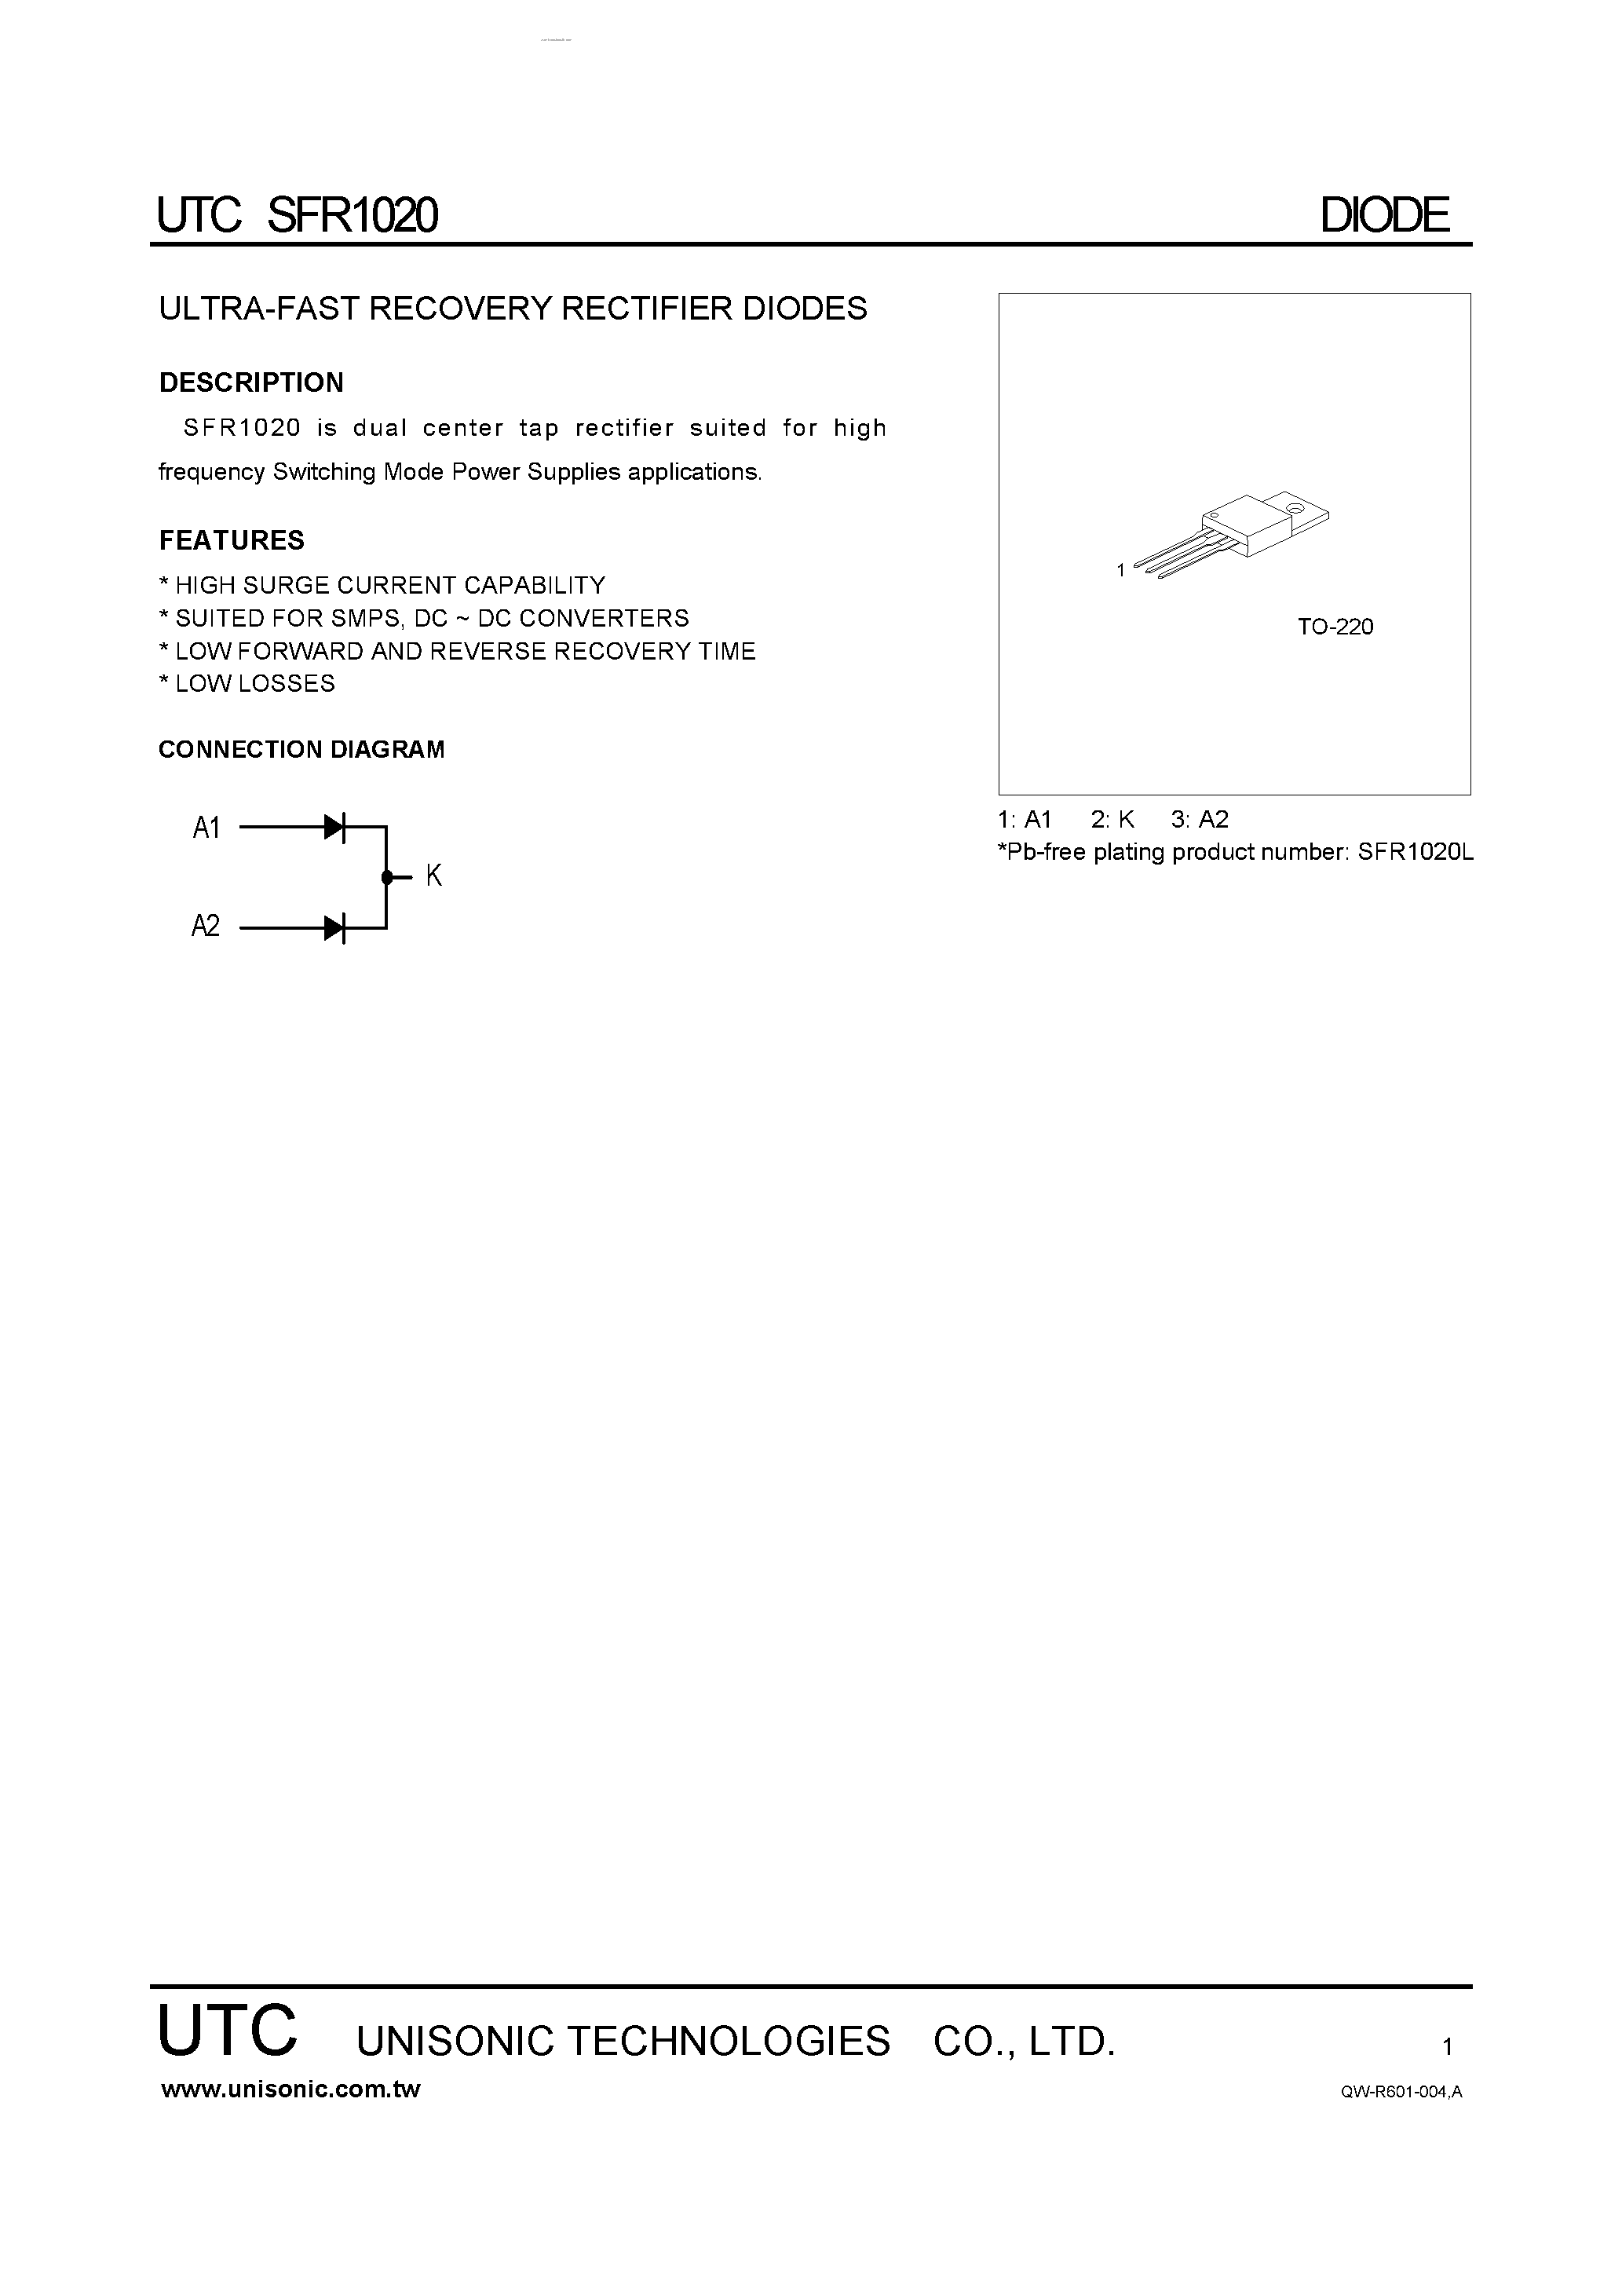 Datasheet SFR1020 - ULTRA-FAST RECOVERY RECTIFIER DIODES page 1